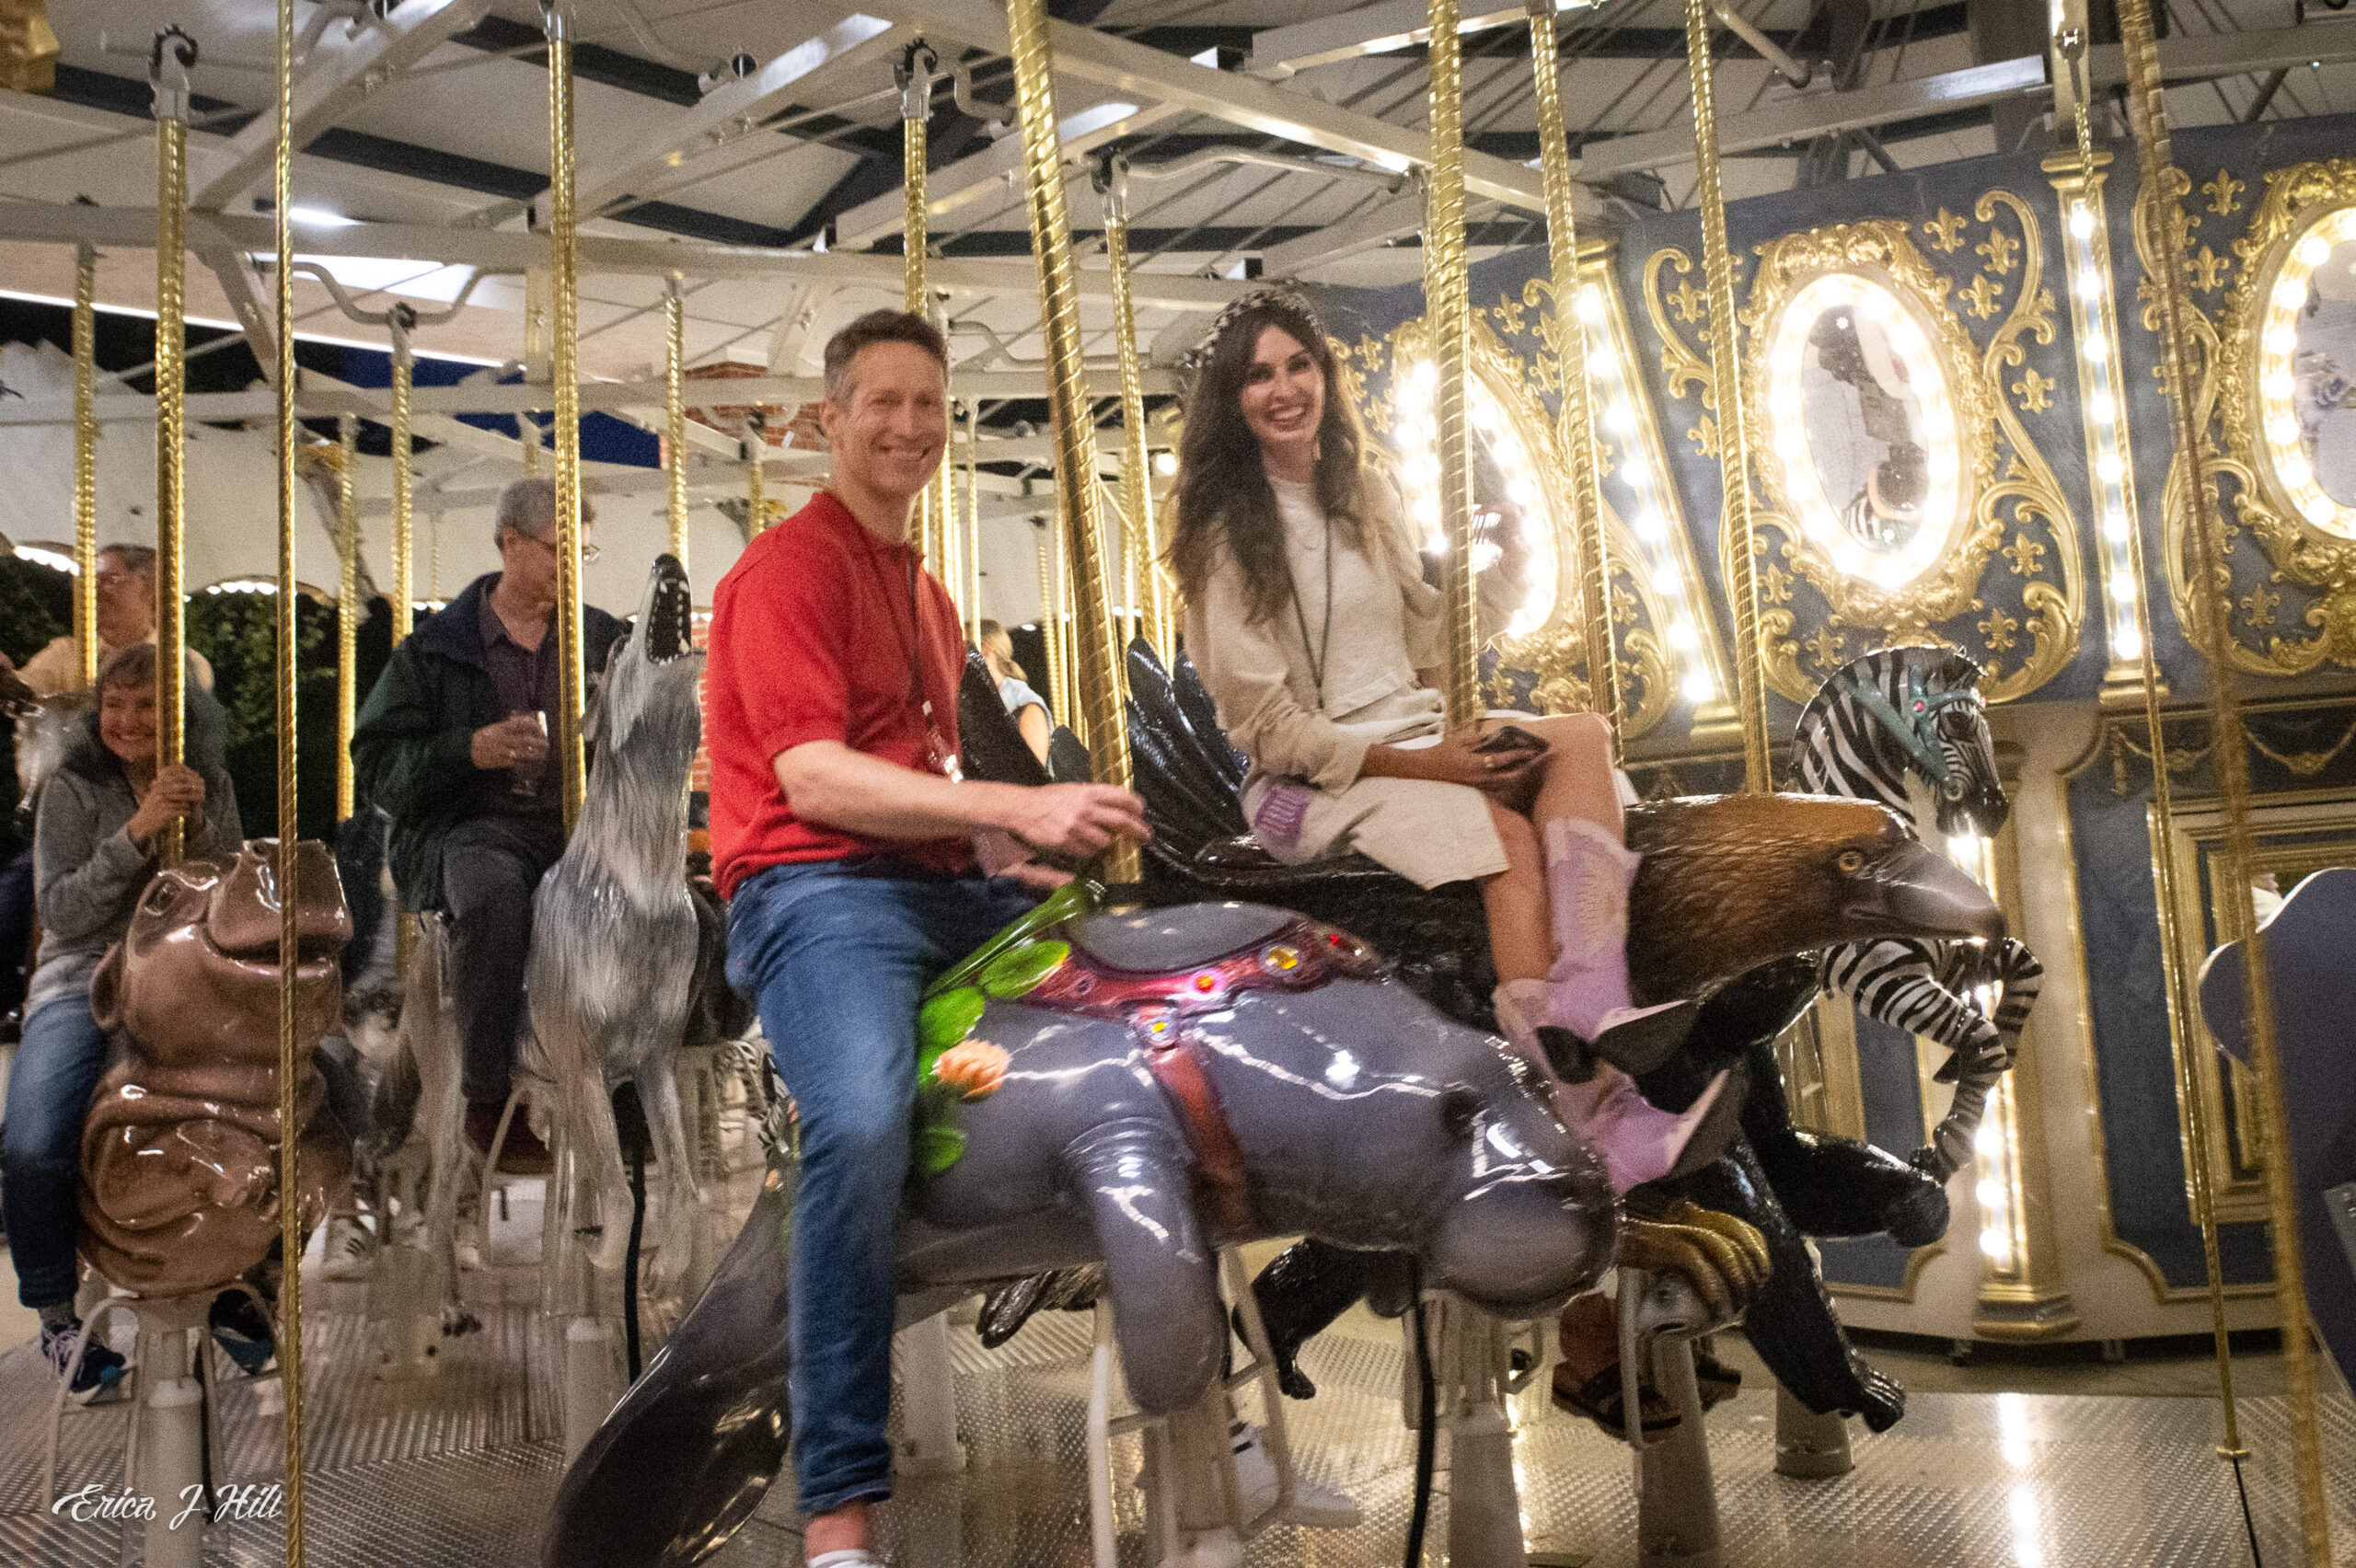 two guests riding the carousel at a zoo event